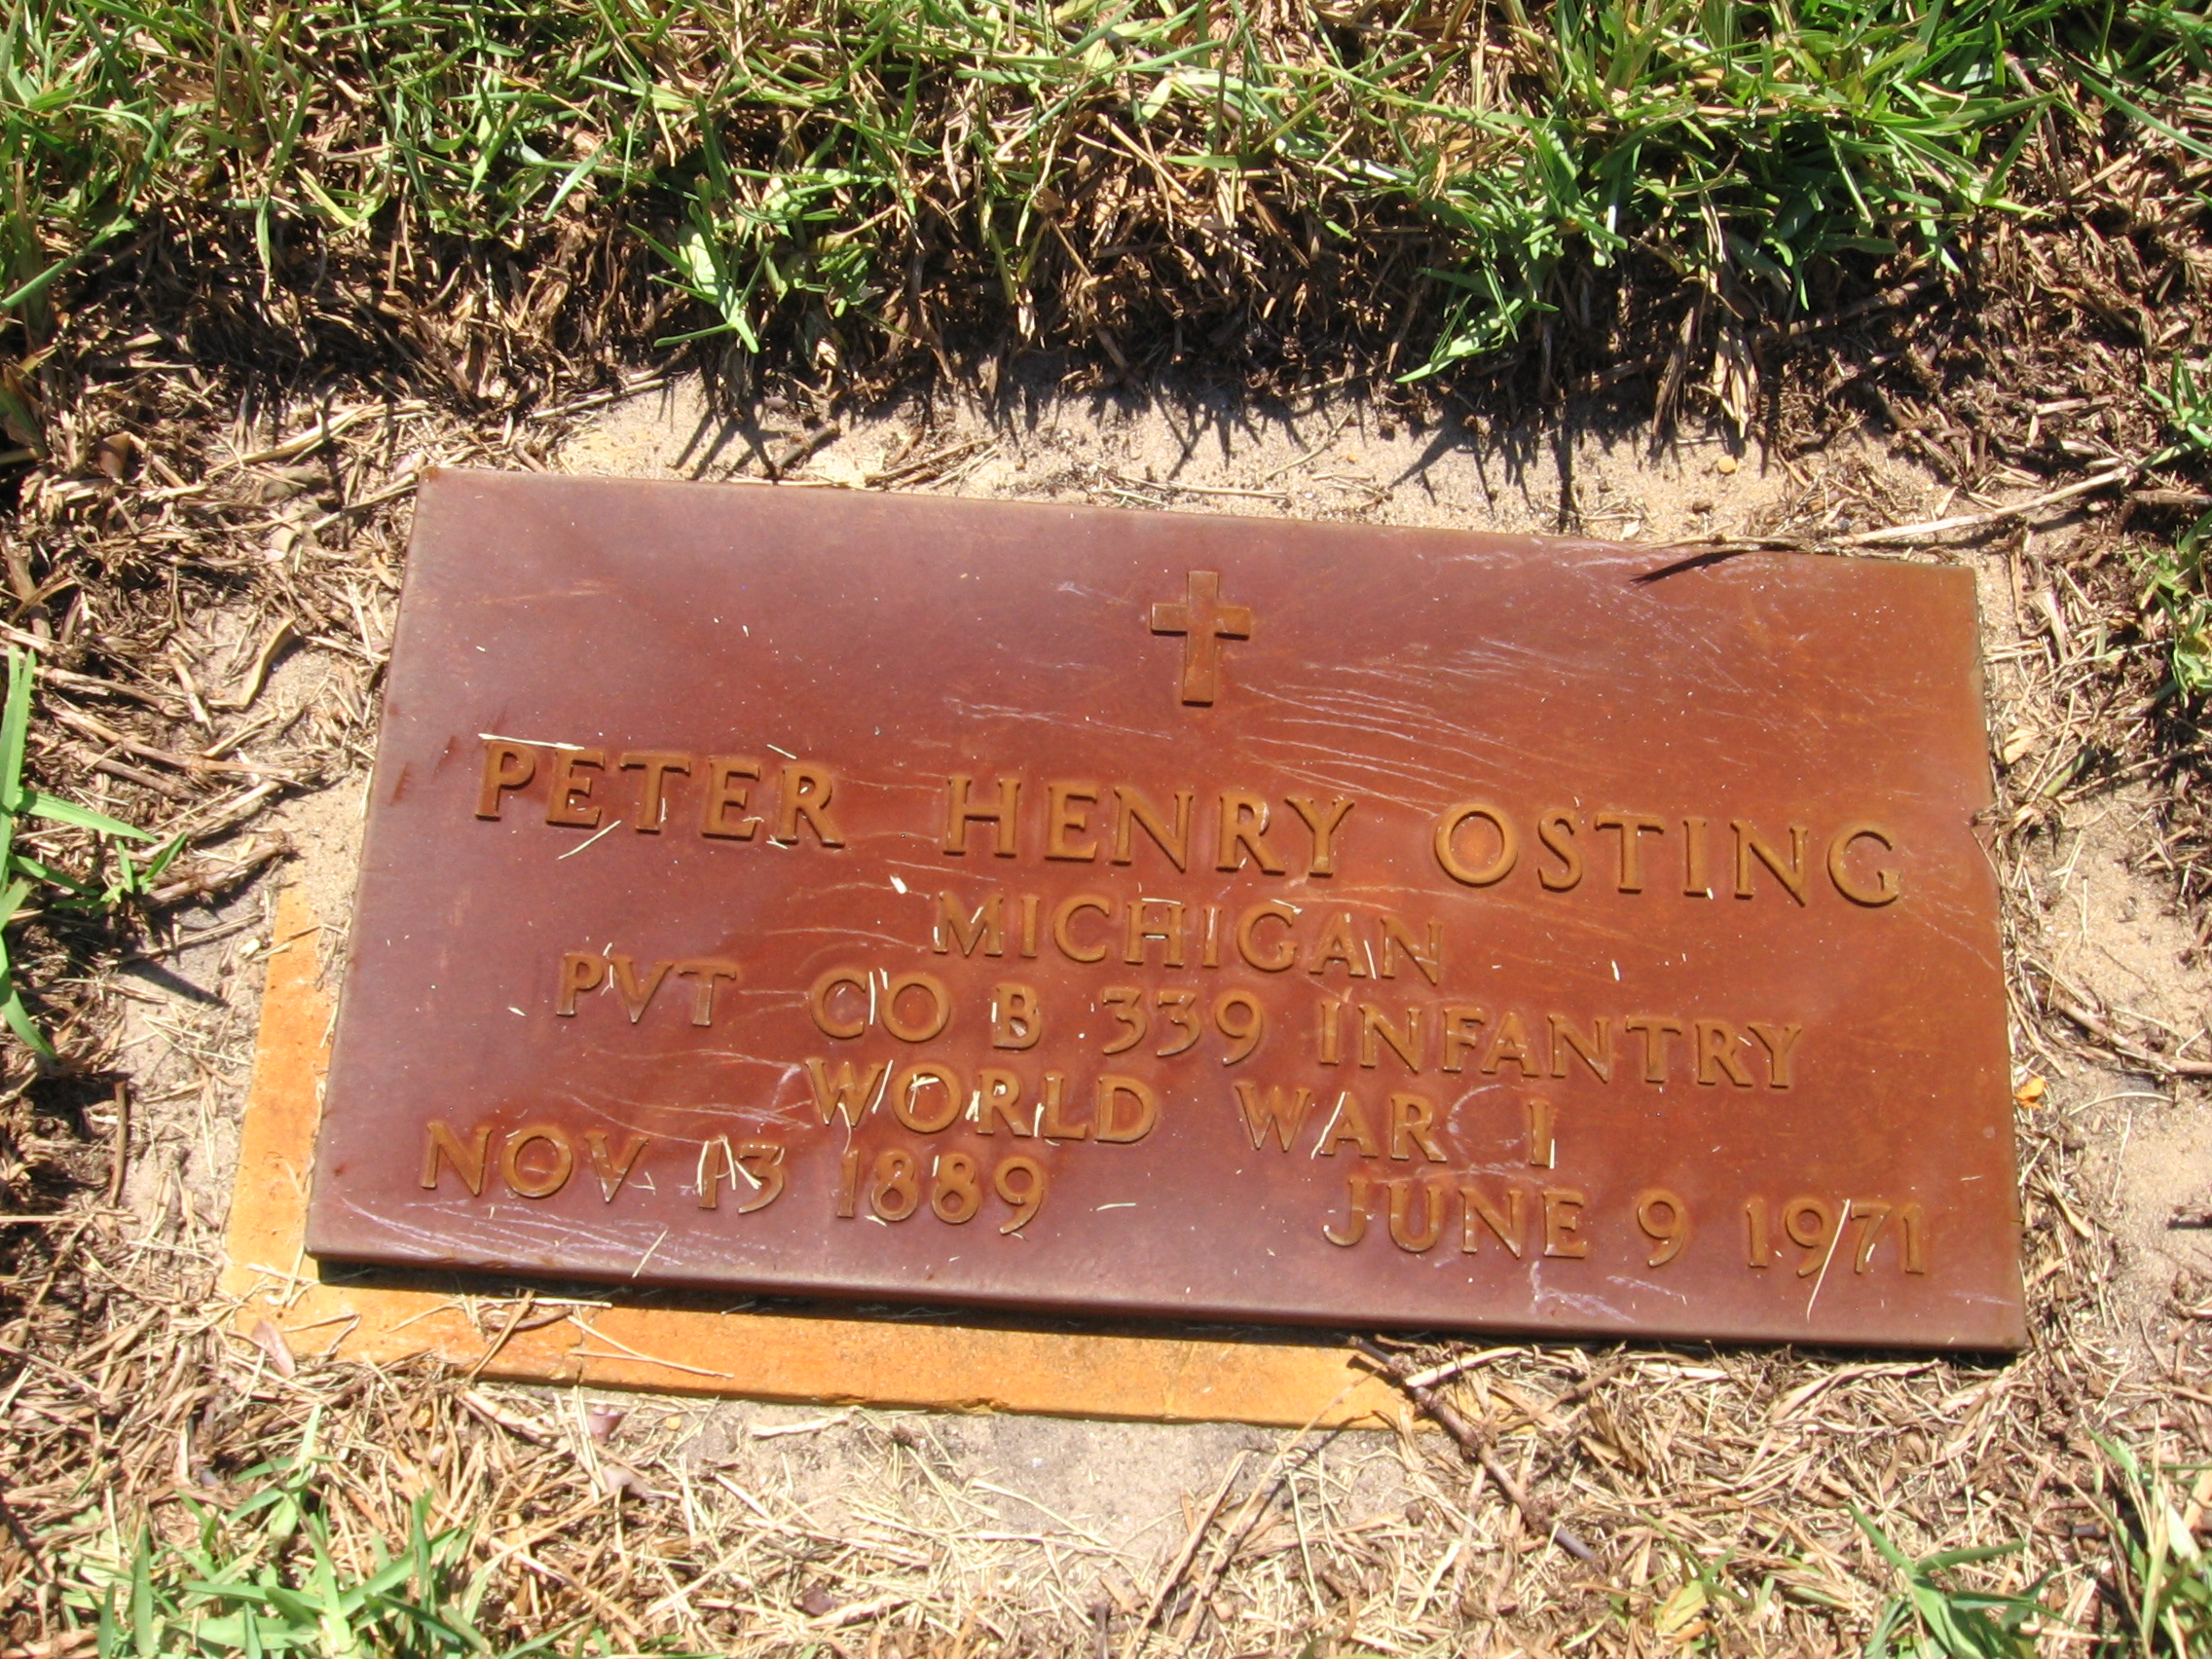 Pvt Peter Henry Osting